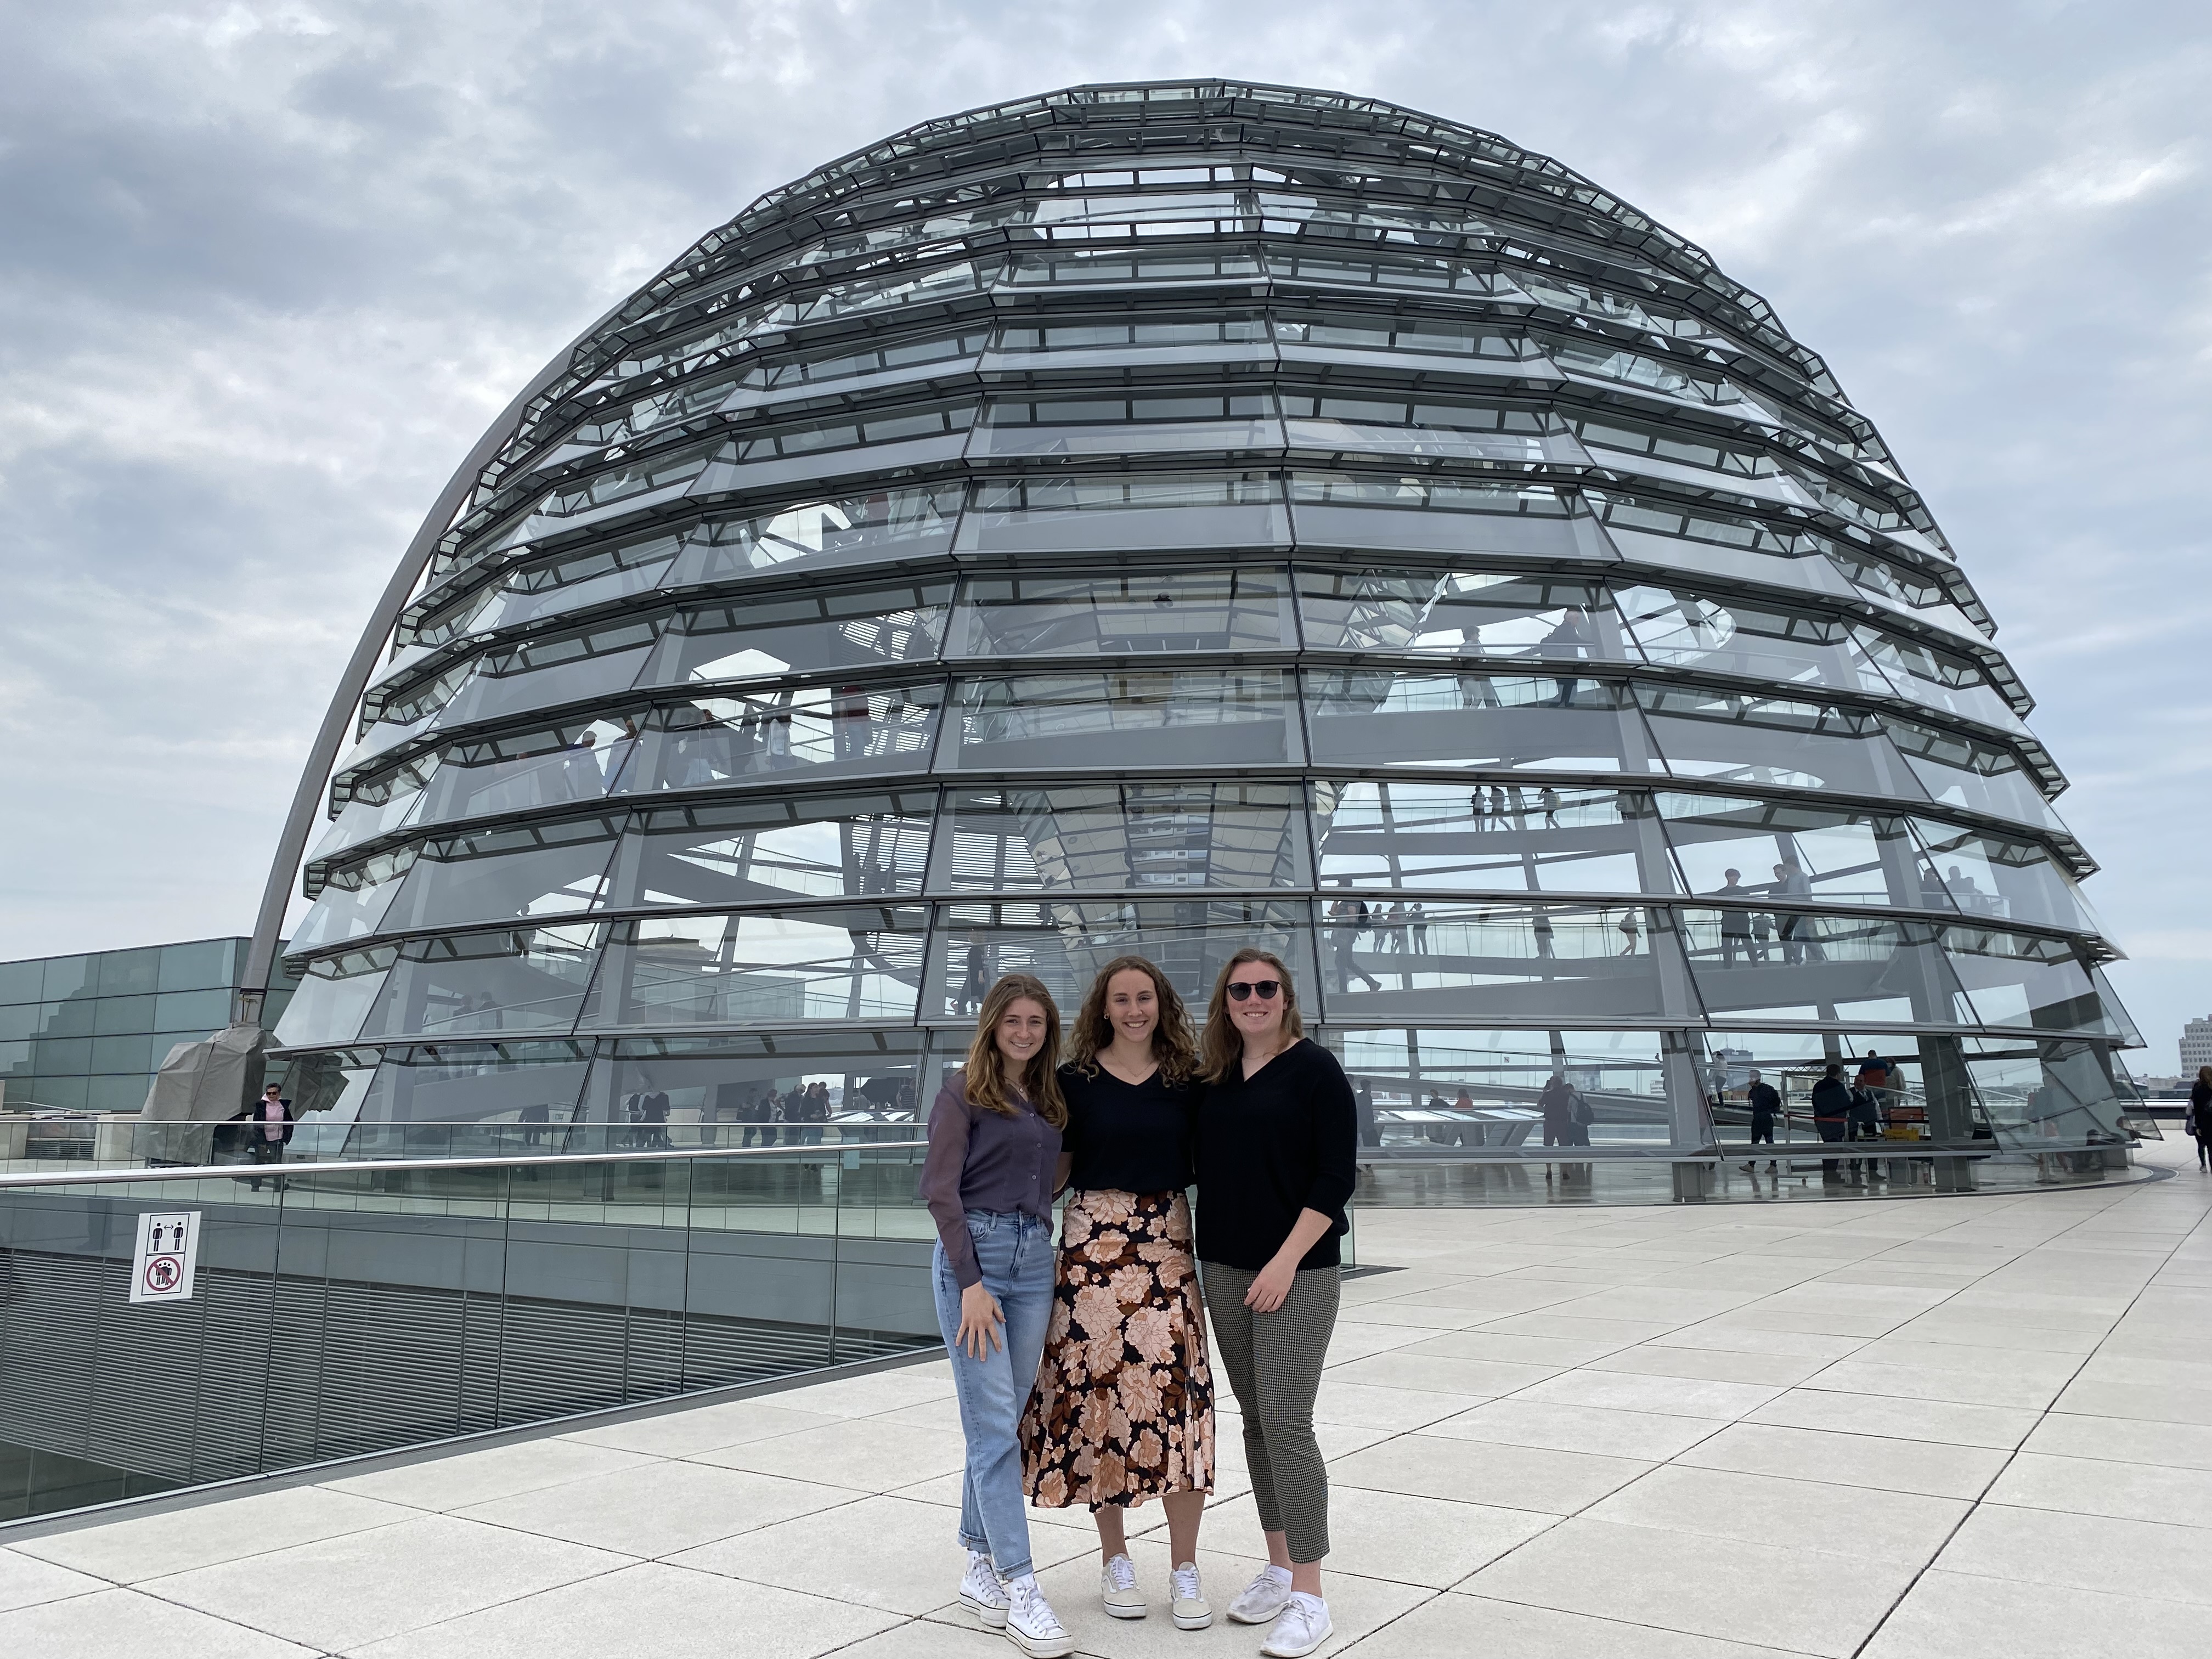 Selah and her classmates had the opportunity to climb all the way to the top of the Reichstag Dome and take in the view of Berlin. 